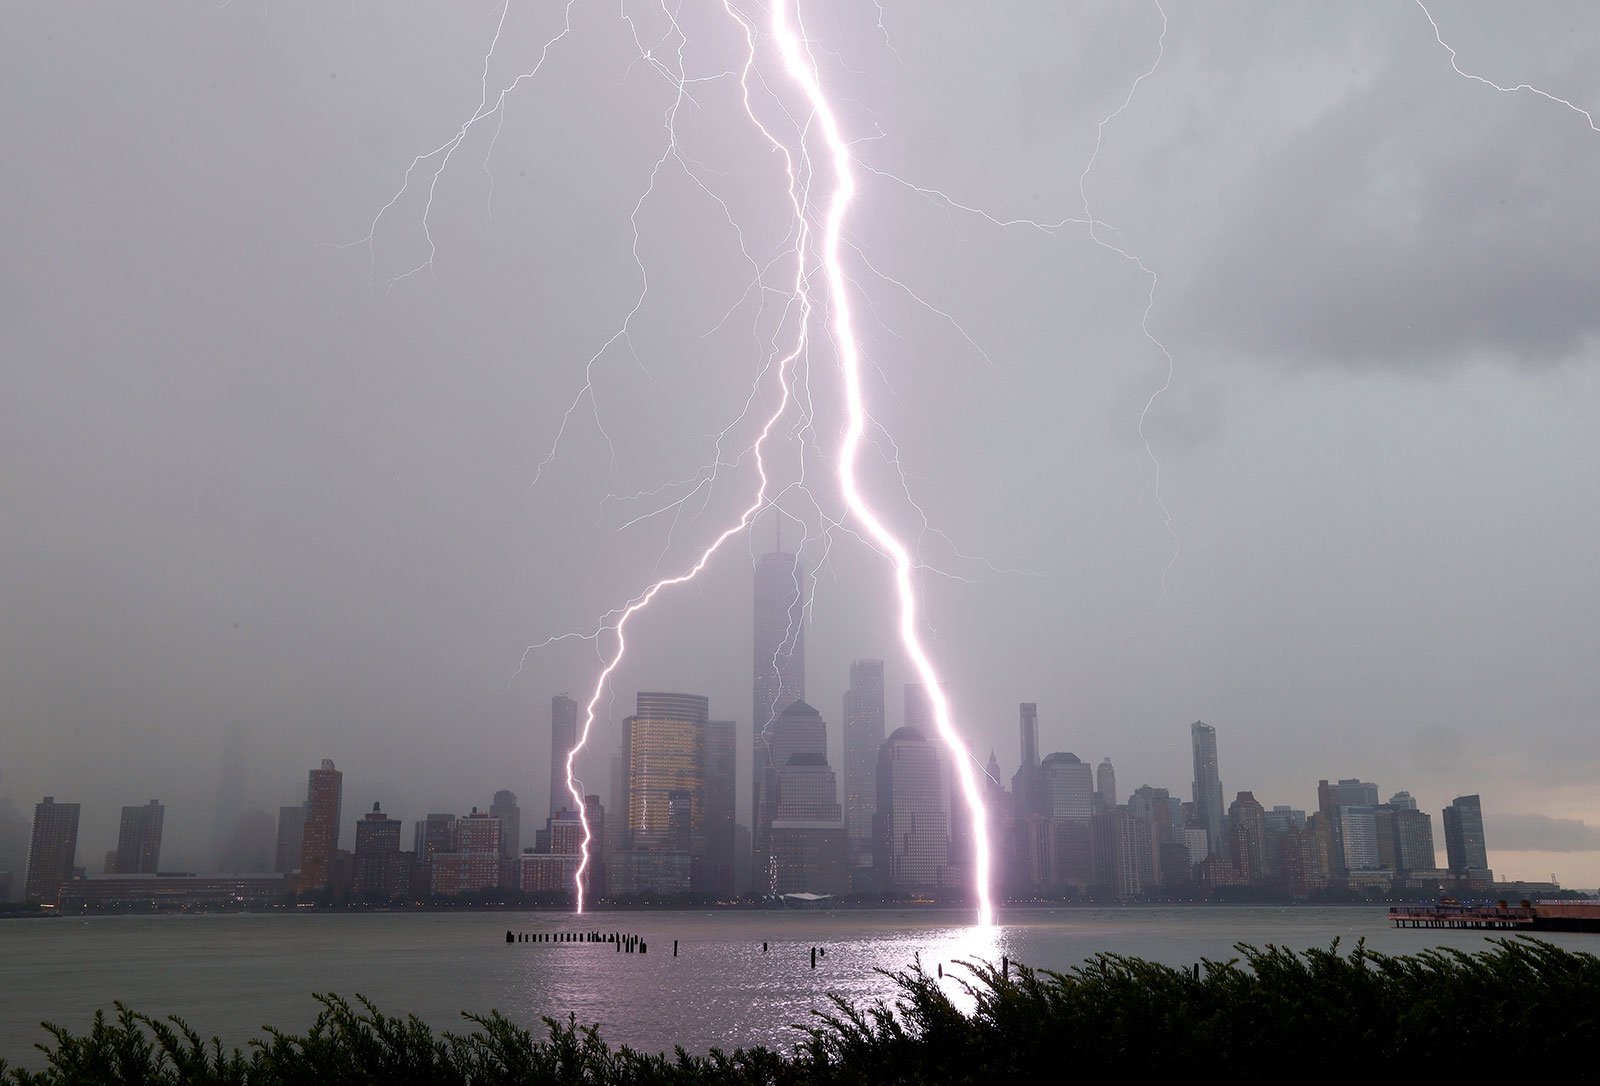 New York thunderstorm with skyline in background 